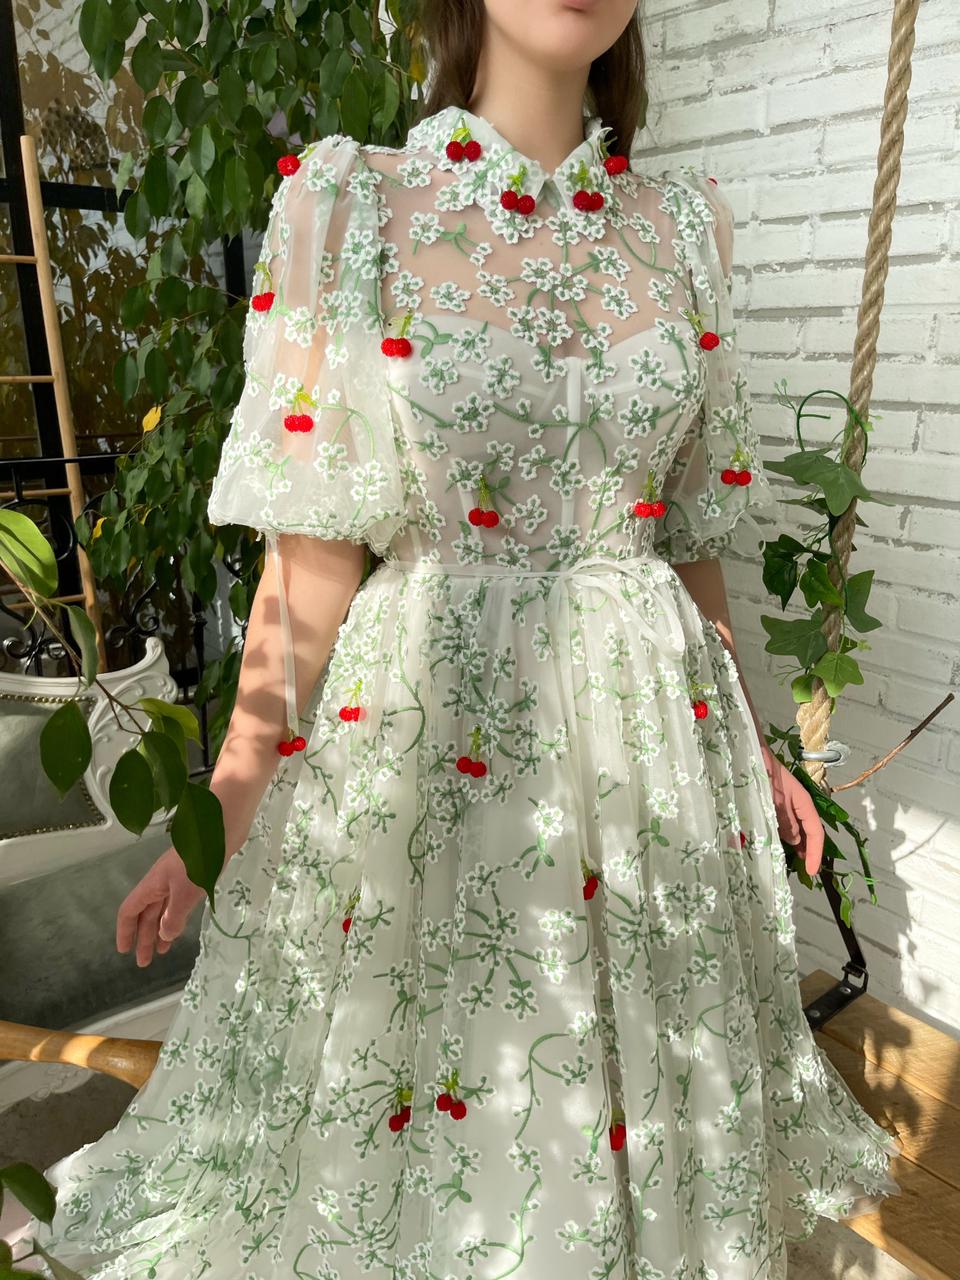 White and green midi dress with short sleeves, daisies and cherries